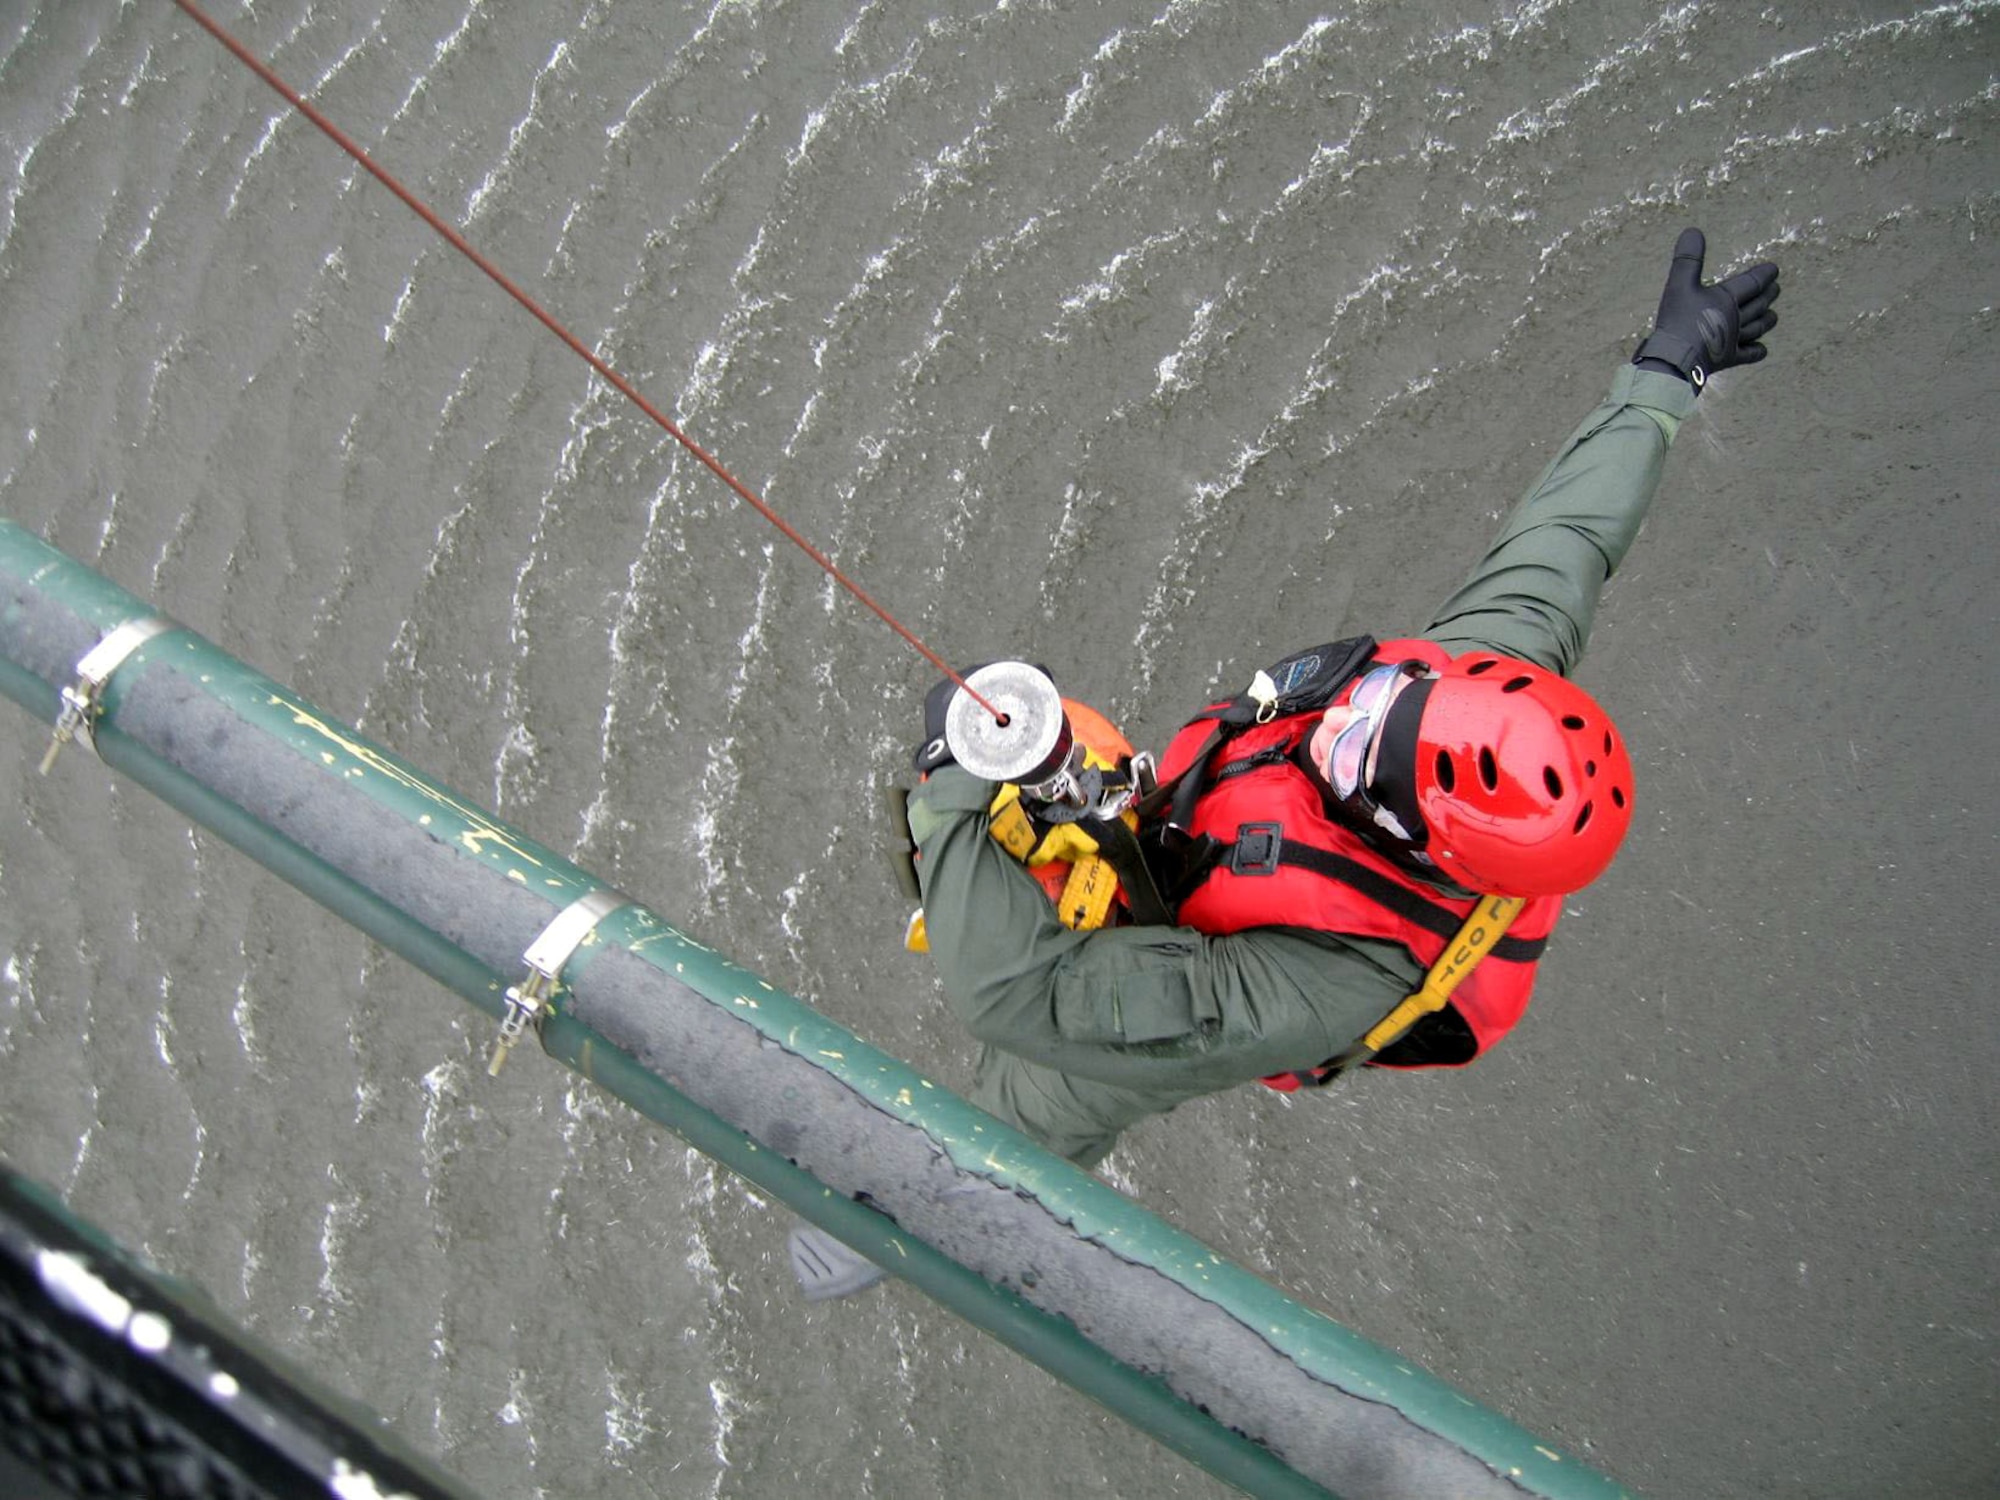 Staff Sgt. George Gonzalez practices water hoist procedures from a UH-1N Huey at Fairchild Air Force Base, Wash. Sergeant Gonzalez is an independent duty medical technician assigned to the 36th Rescue Flight as a flight medic in support of survival, evasion, resistance and escape specialist training and the Air Force combat survival school. (U.S. Air Force photo/Senior Airman Jacob Bragg) 
